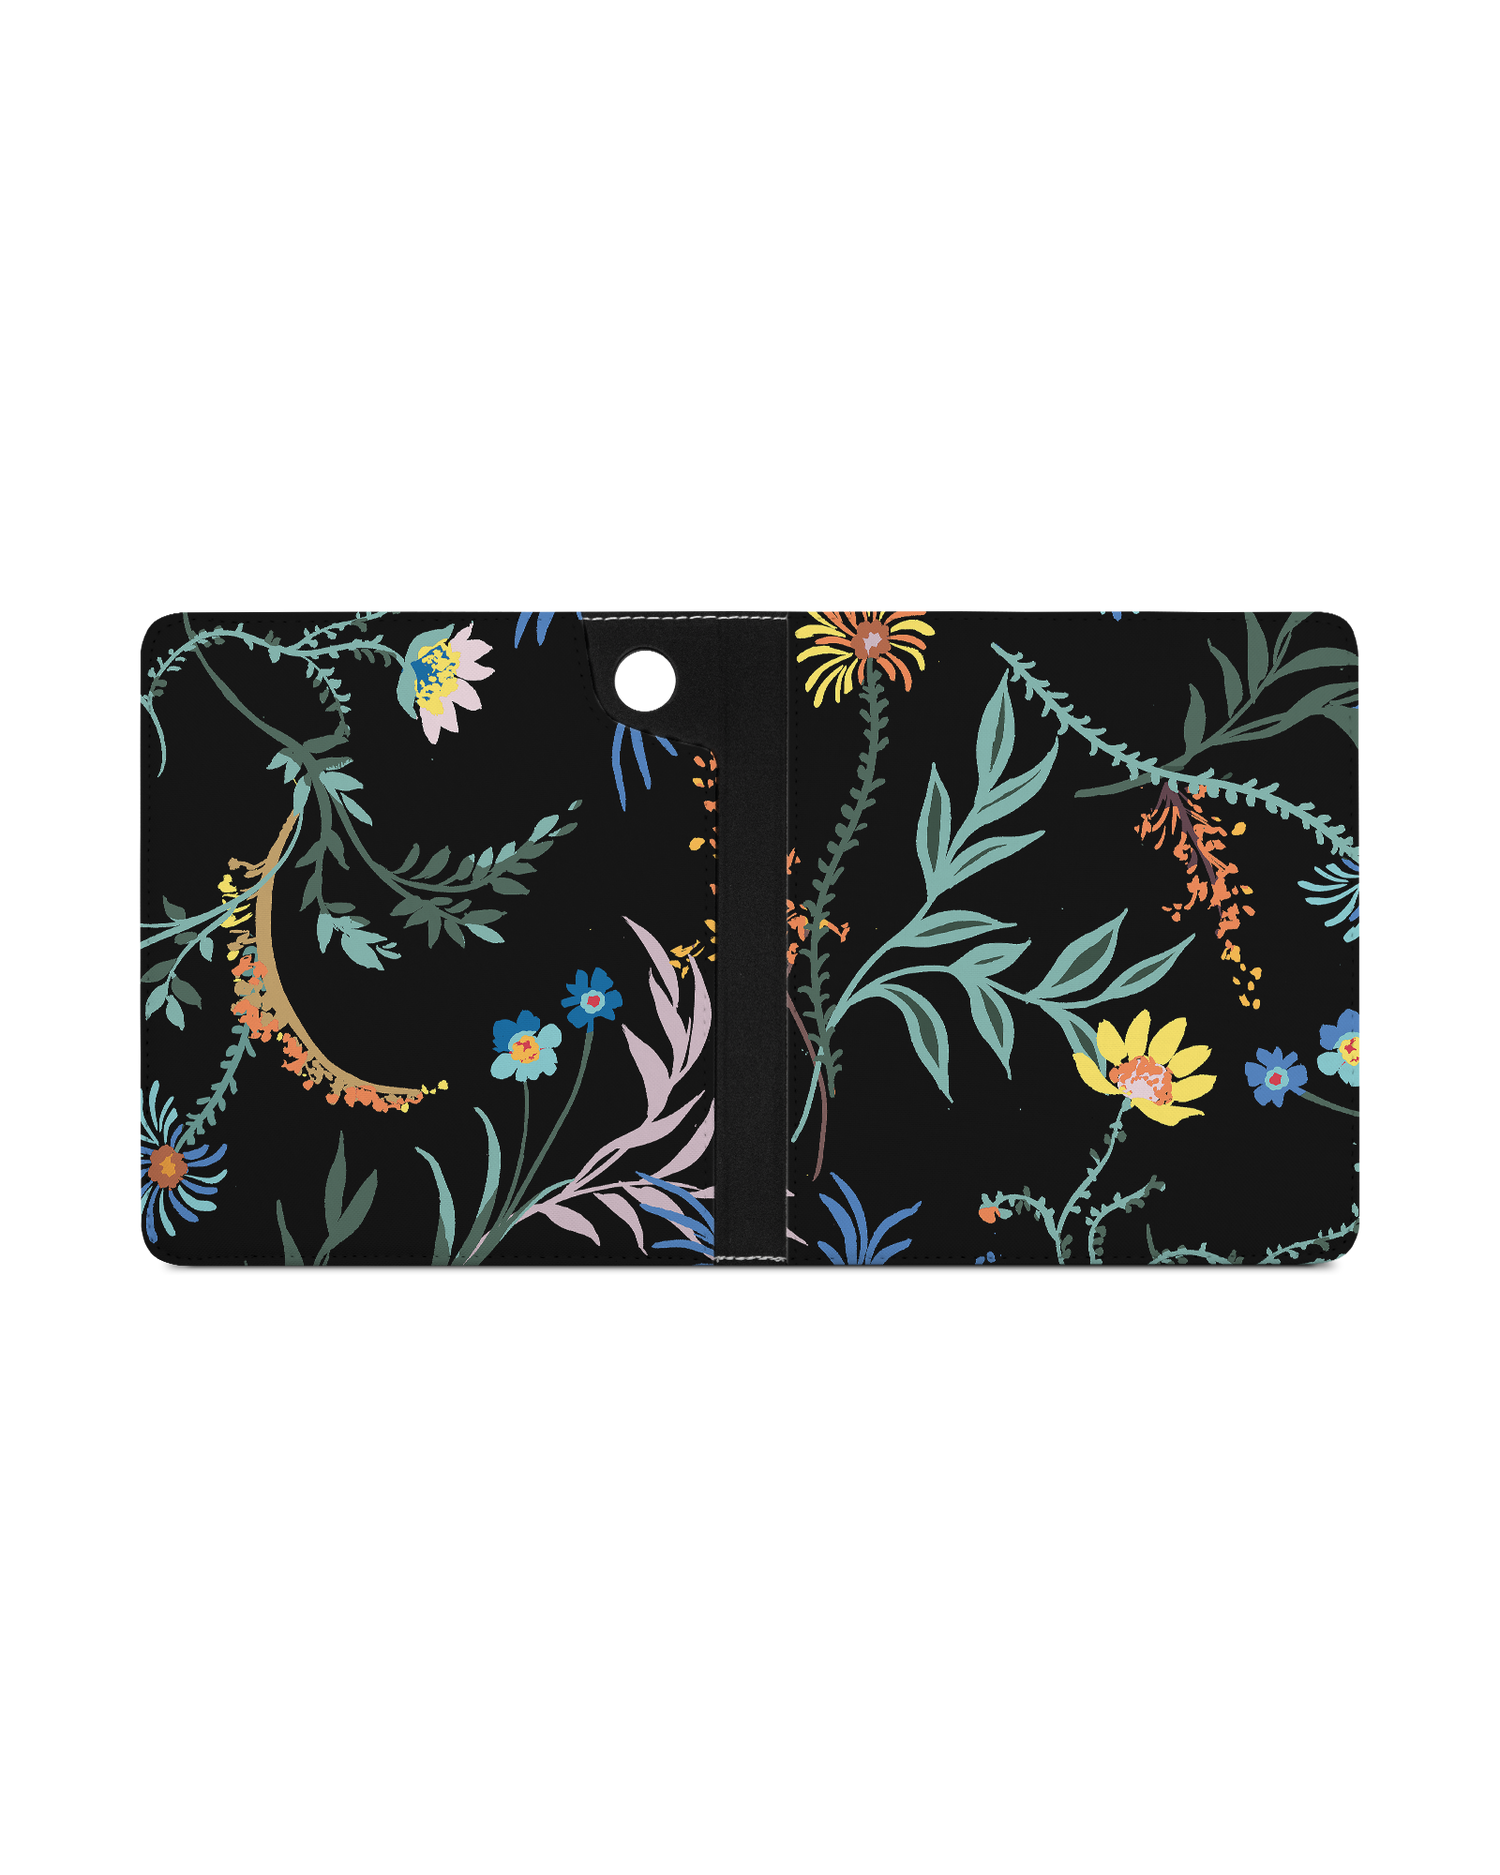 Woodland Spring Floral eReader Case for tolino epos 3 (2022): Opened exterior view